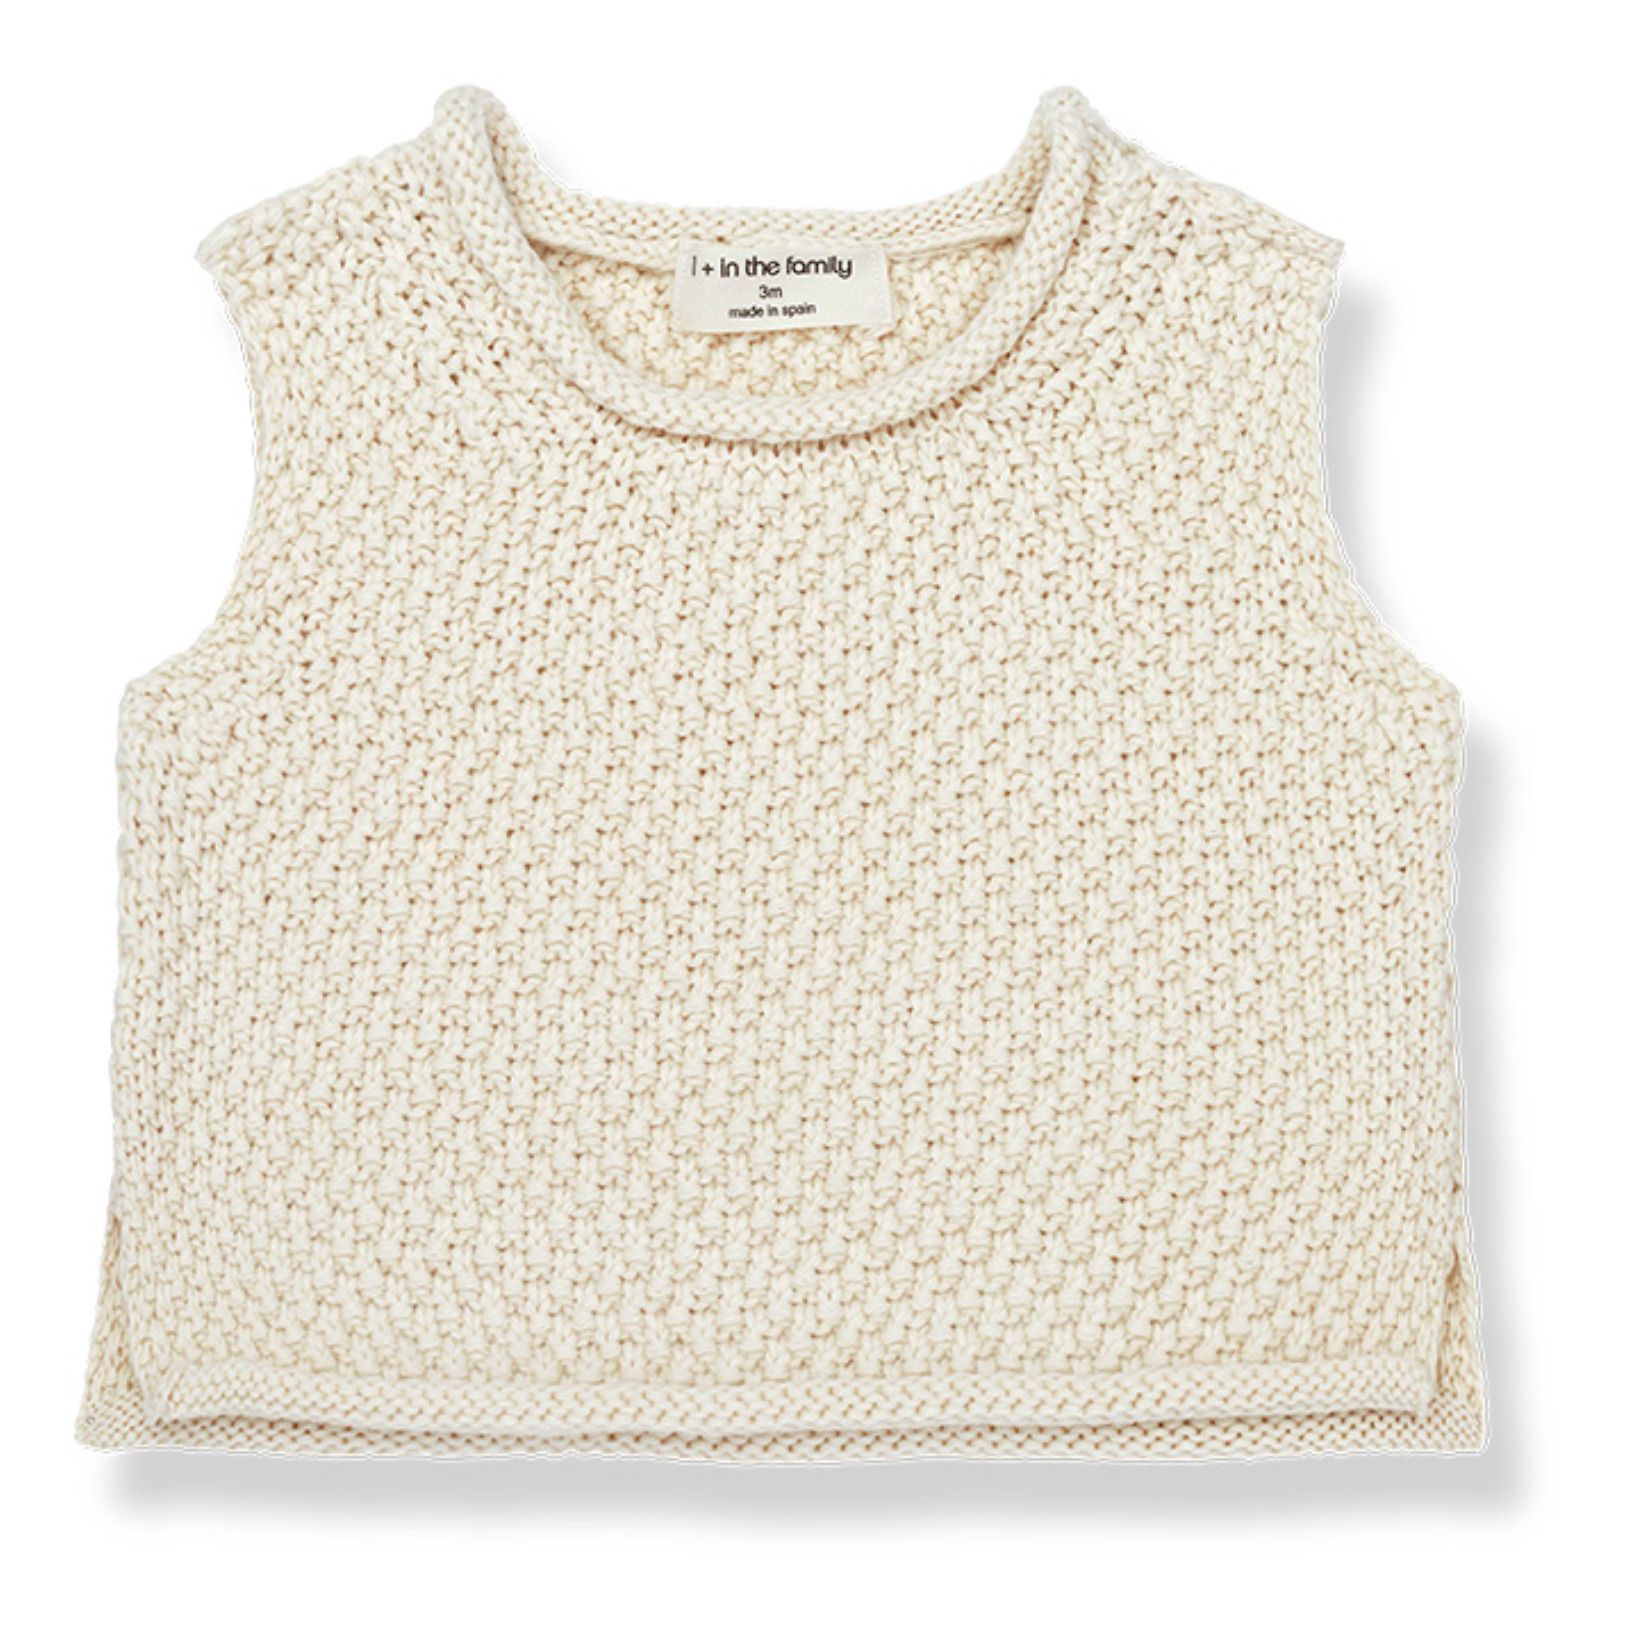 Gabriel Organic Cotton Knitted Vest Ecru 1+ in the family Fashion ...